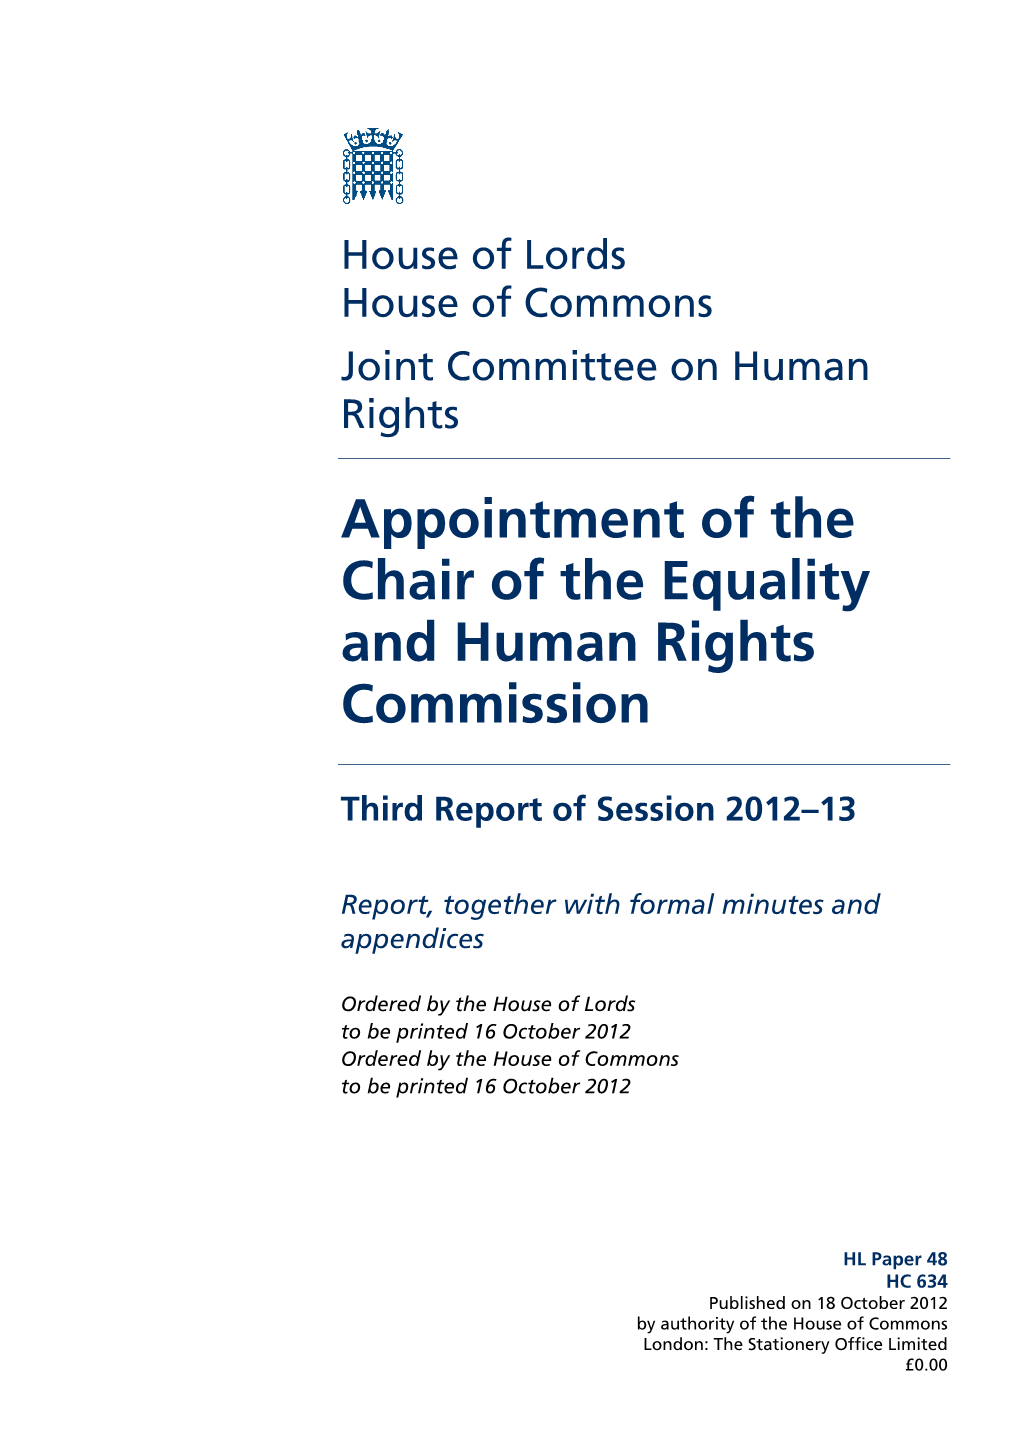 Appointment of the Chair of the Equality and Human Rights Commission